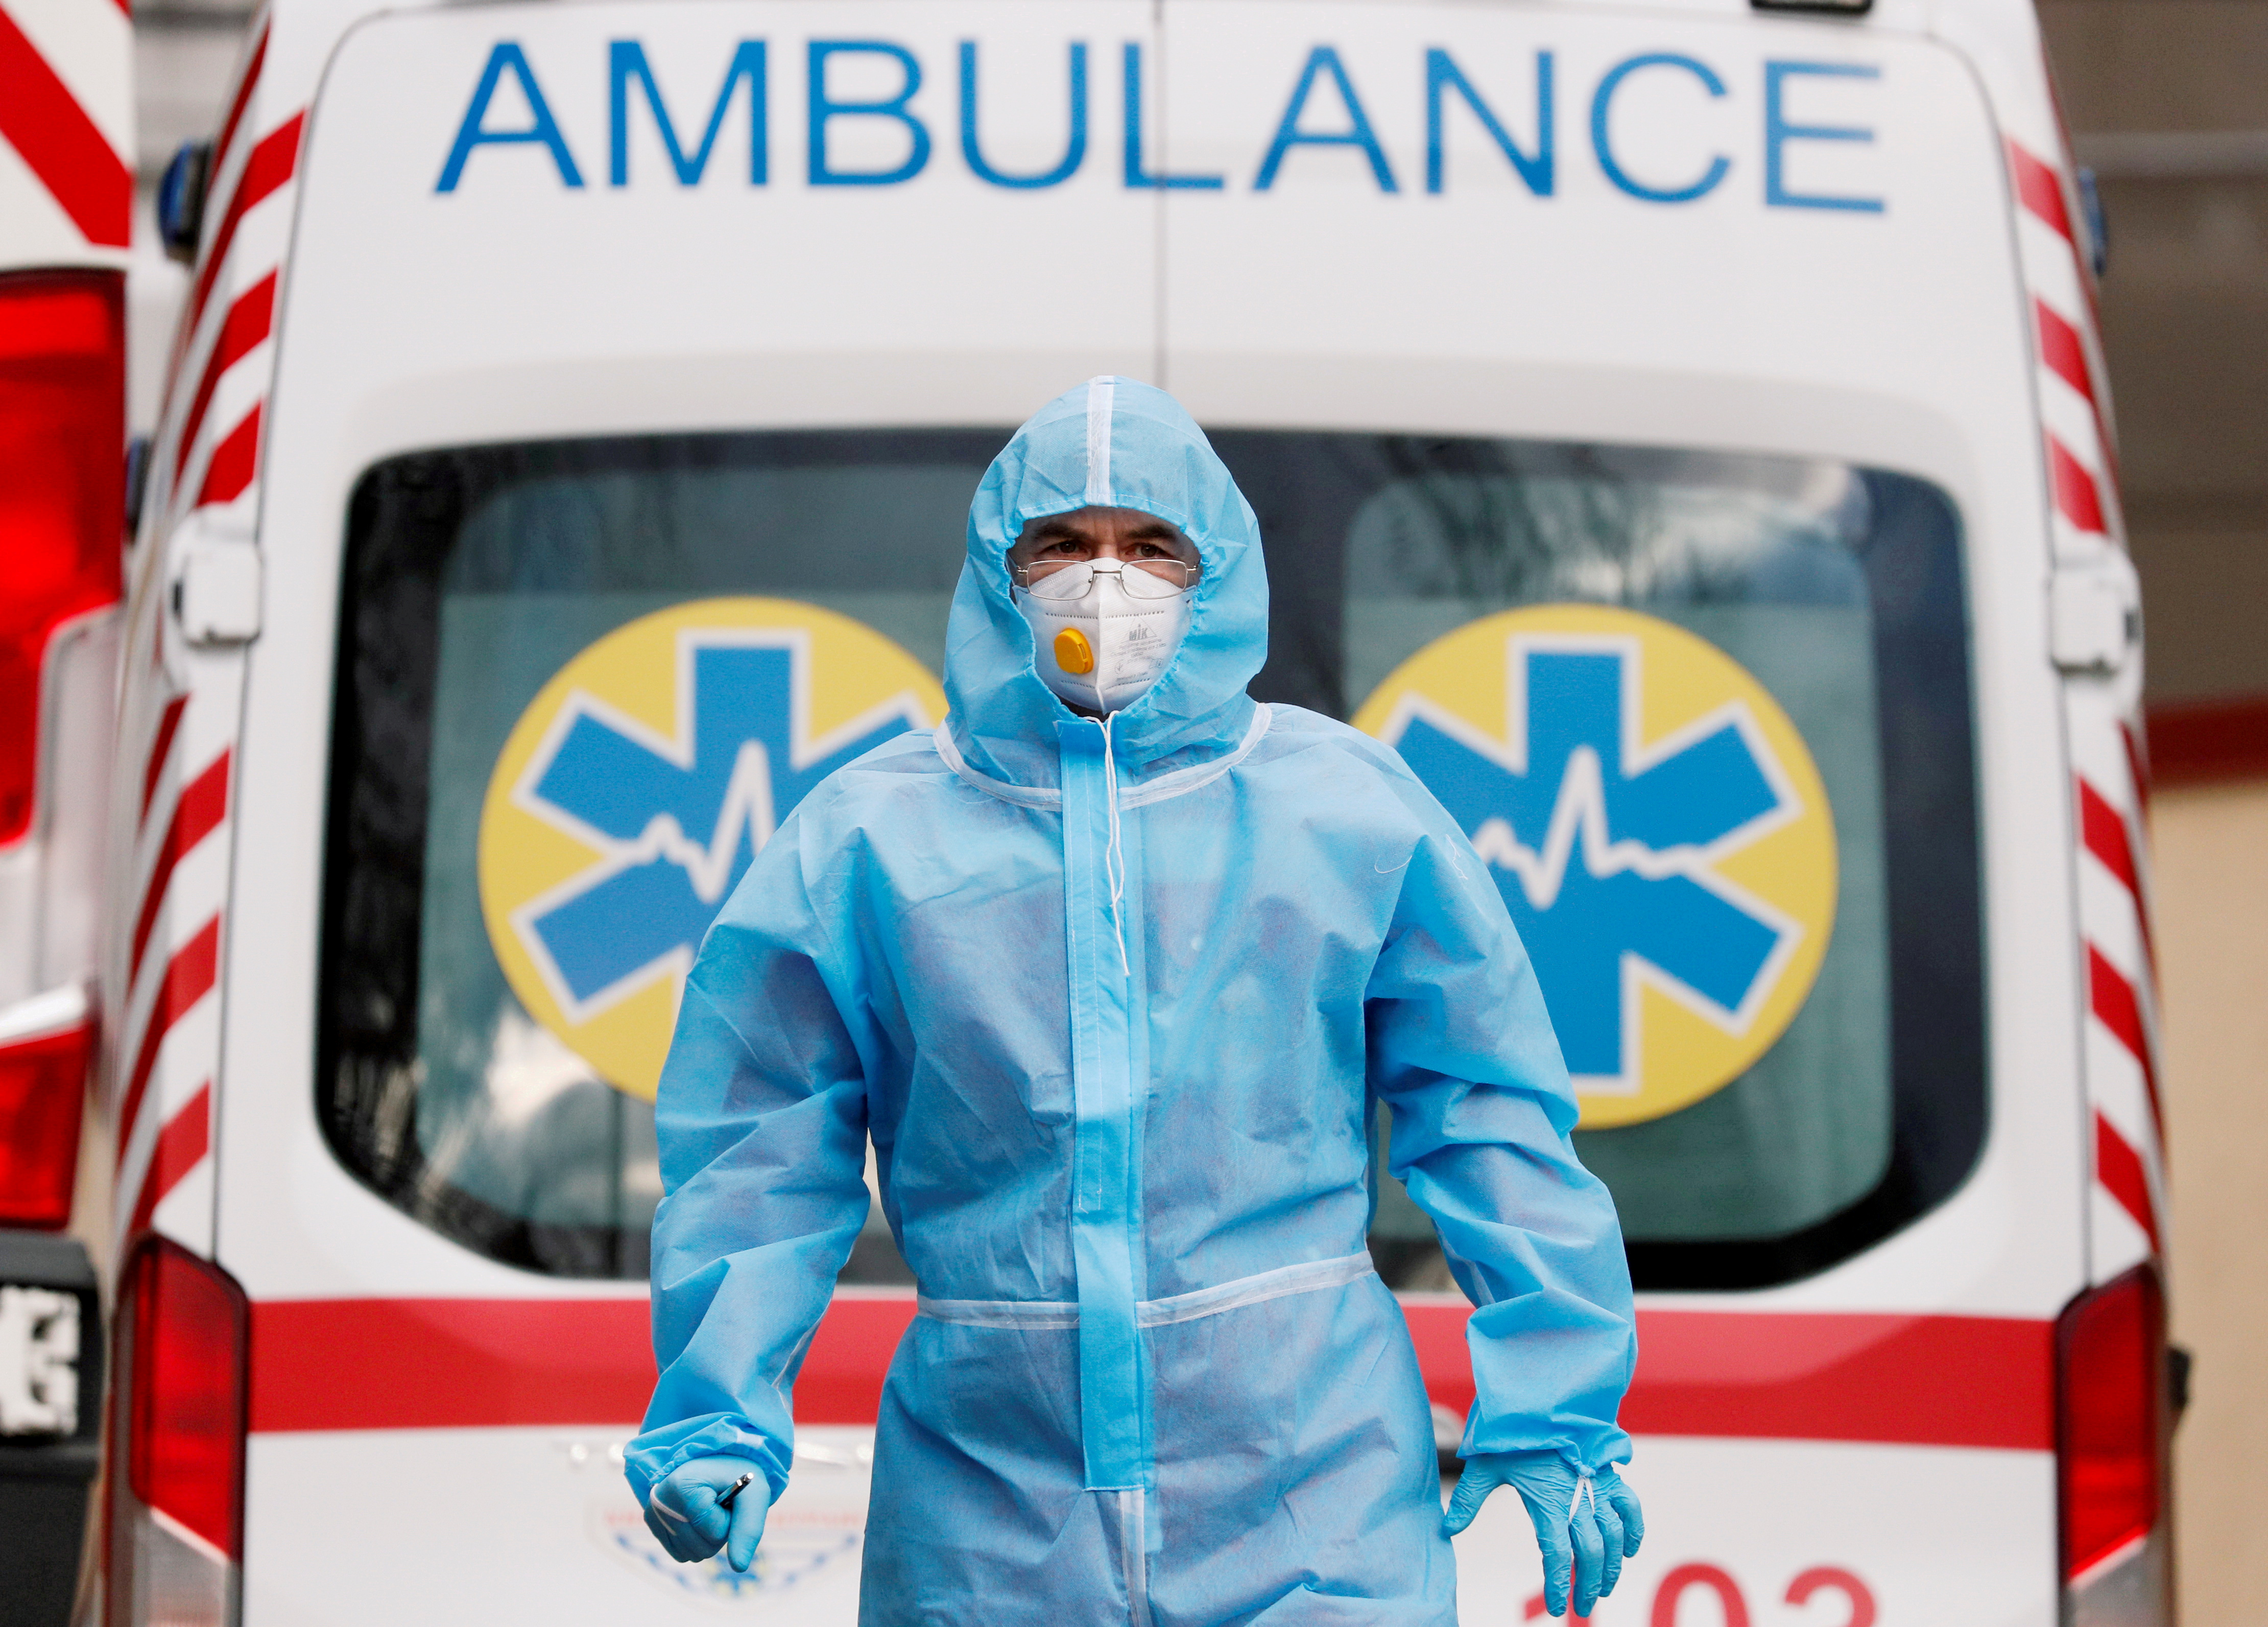 A medical worker wearing protective gear stands next to an ambulance outside a hospital for patients infected with COVID-19 in Kyiv, Ukraine, November 24, 2020.  REUTERS/Gleb Garanich/File Photo